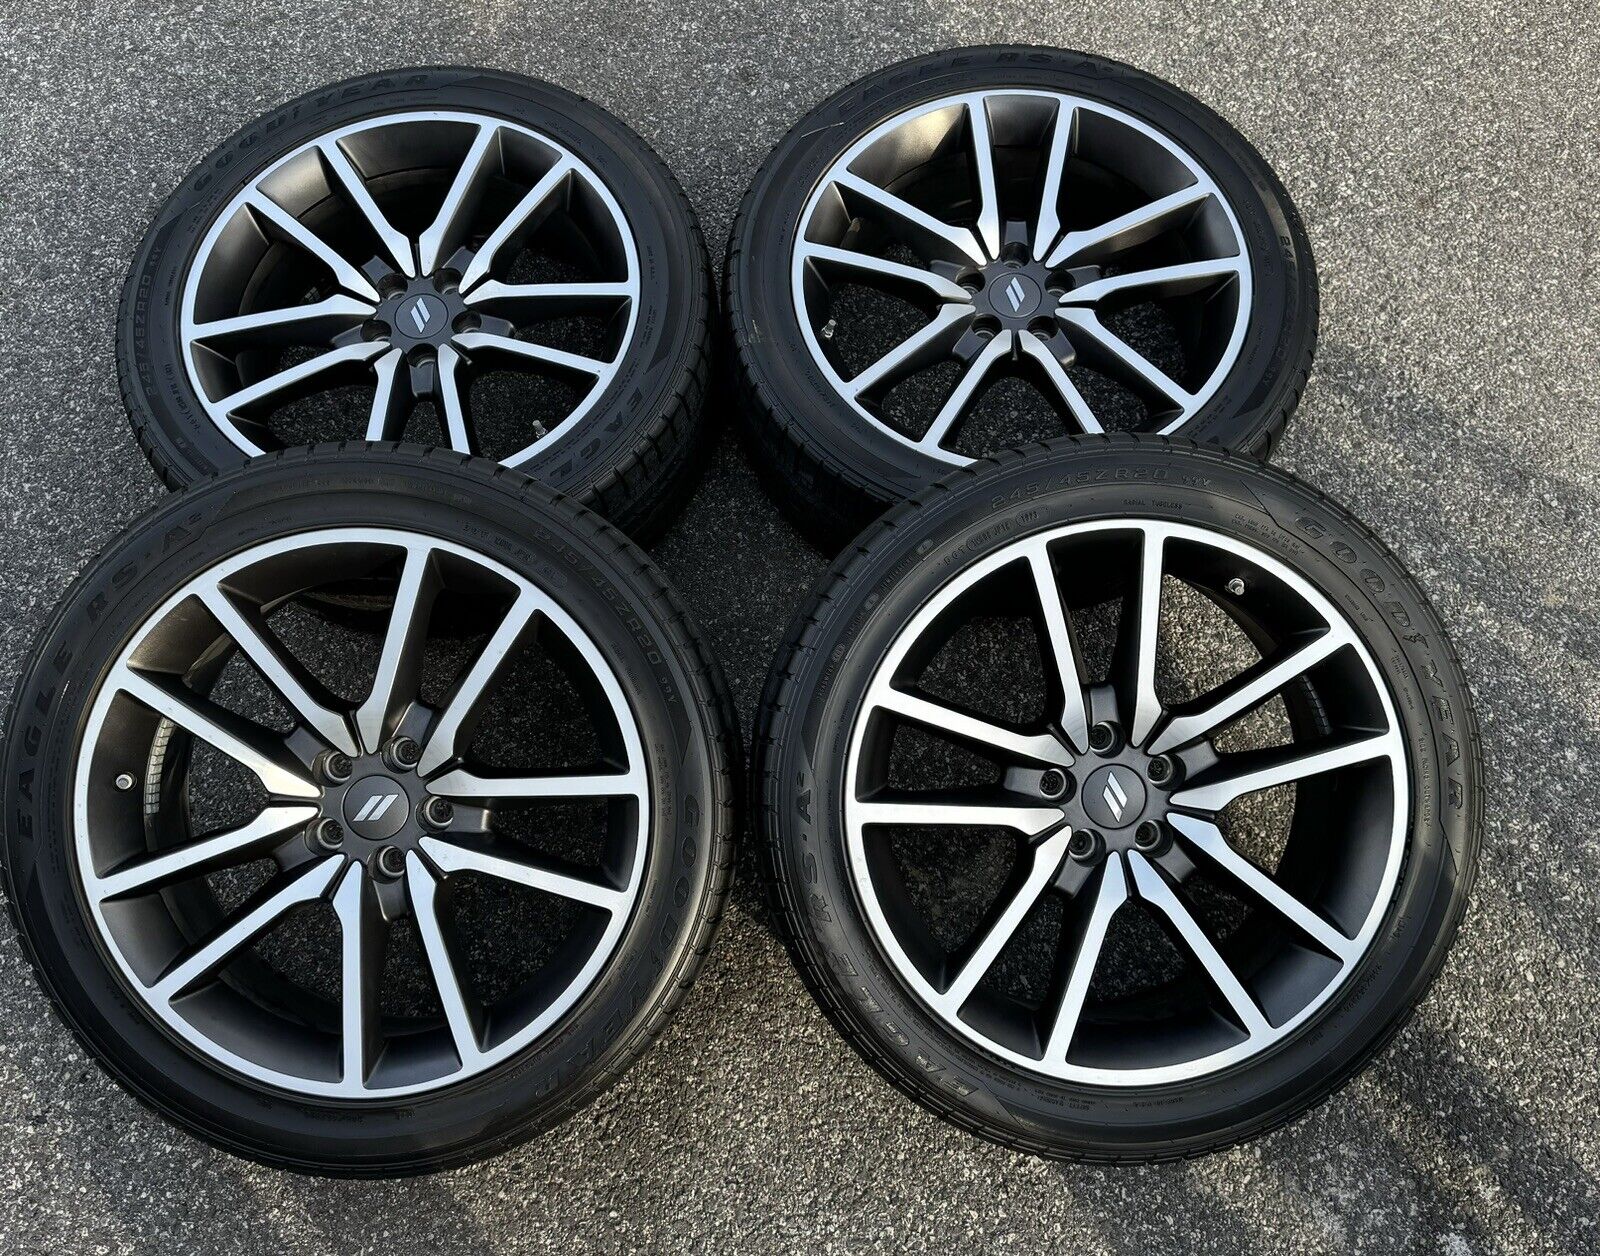 New 2023 Dodge Charger Challenger 20” Wheels Rims Tires 245/45/20 OEM 5x115